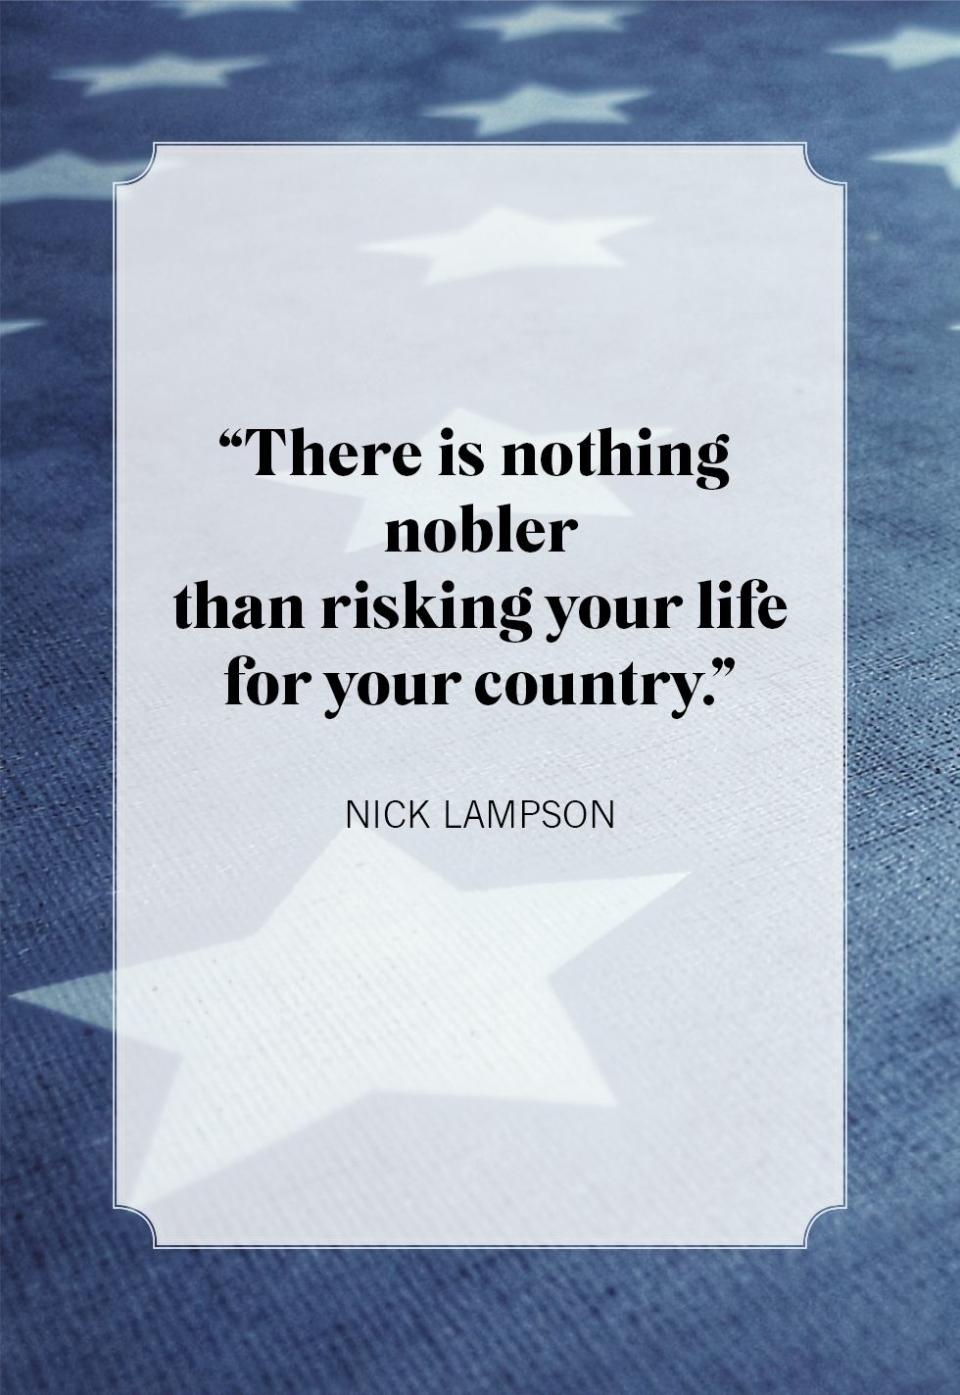 memorial day quotes nick lampson